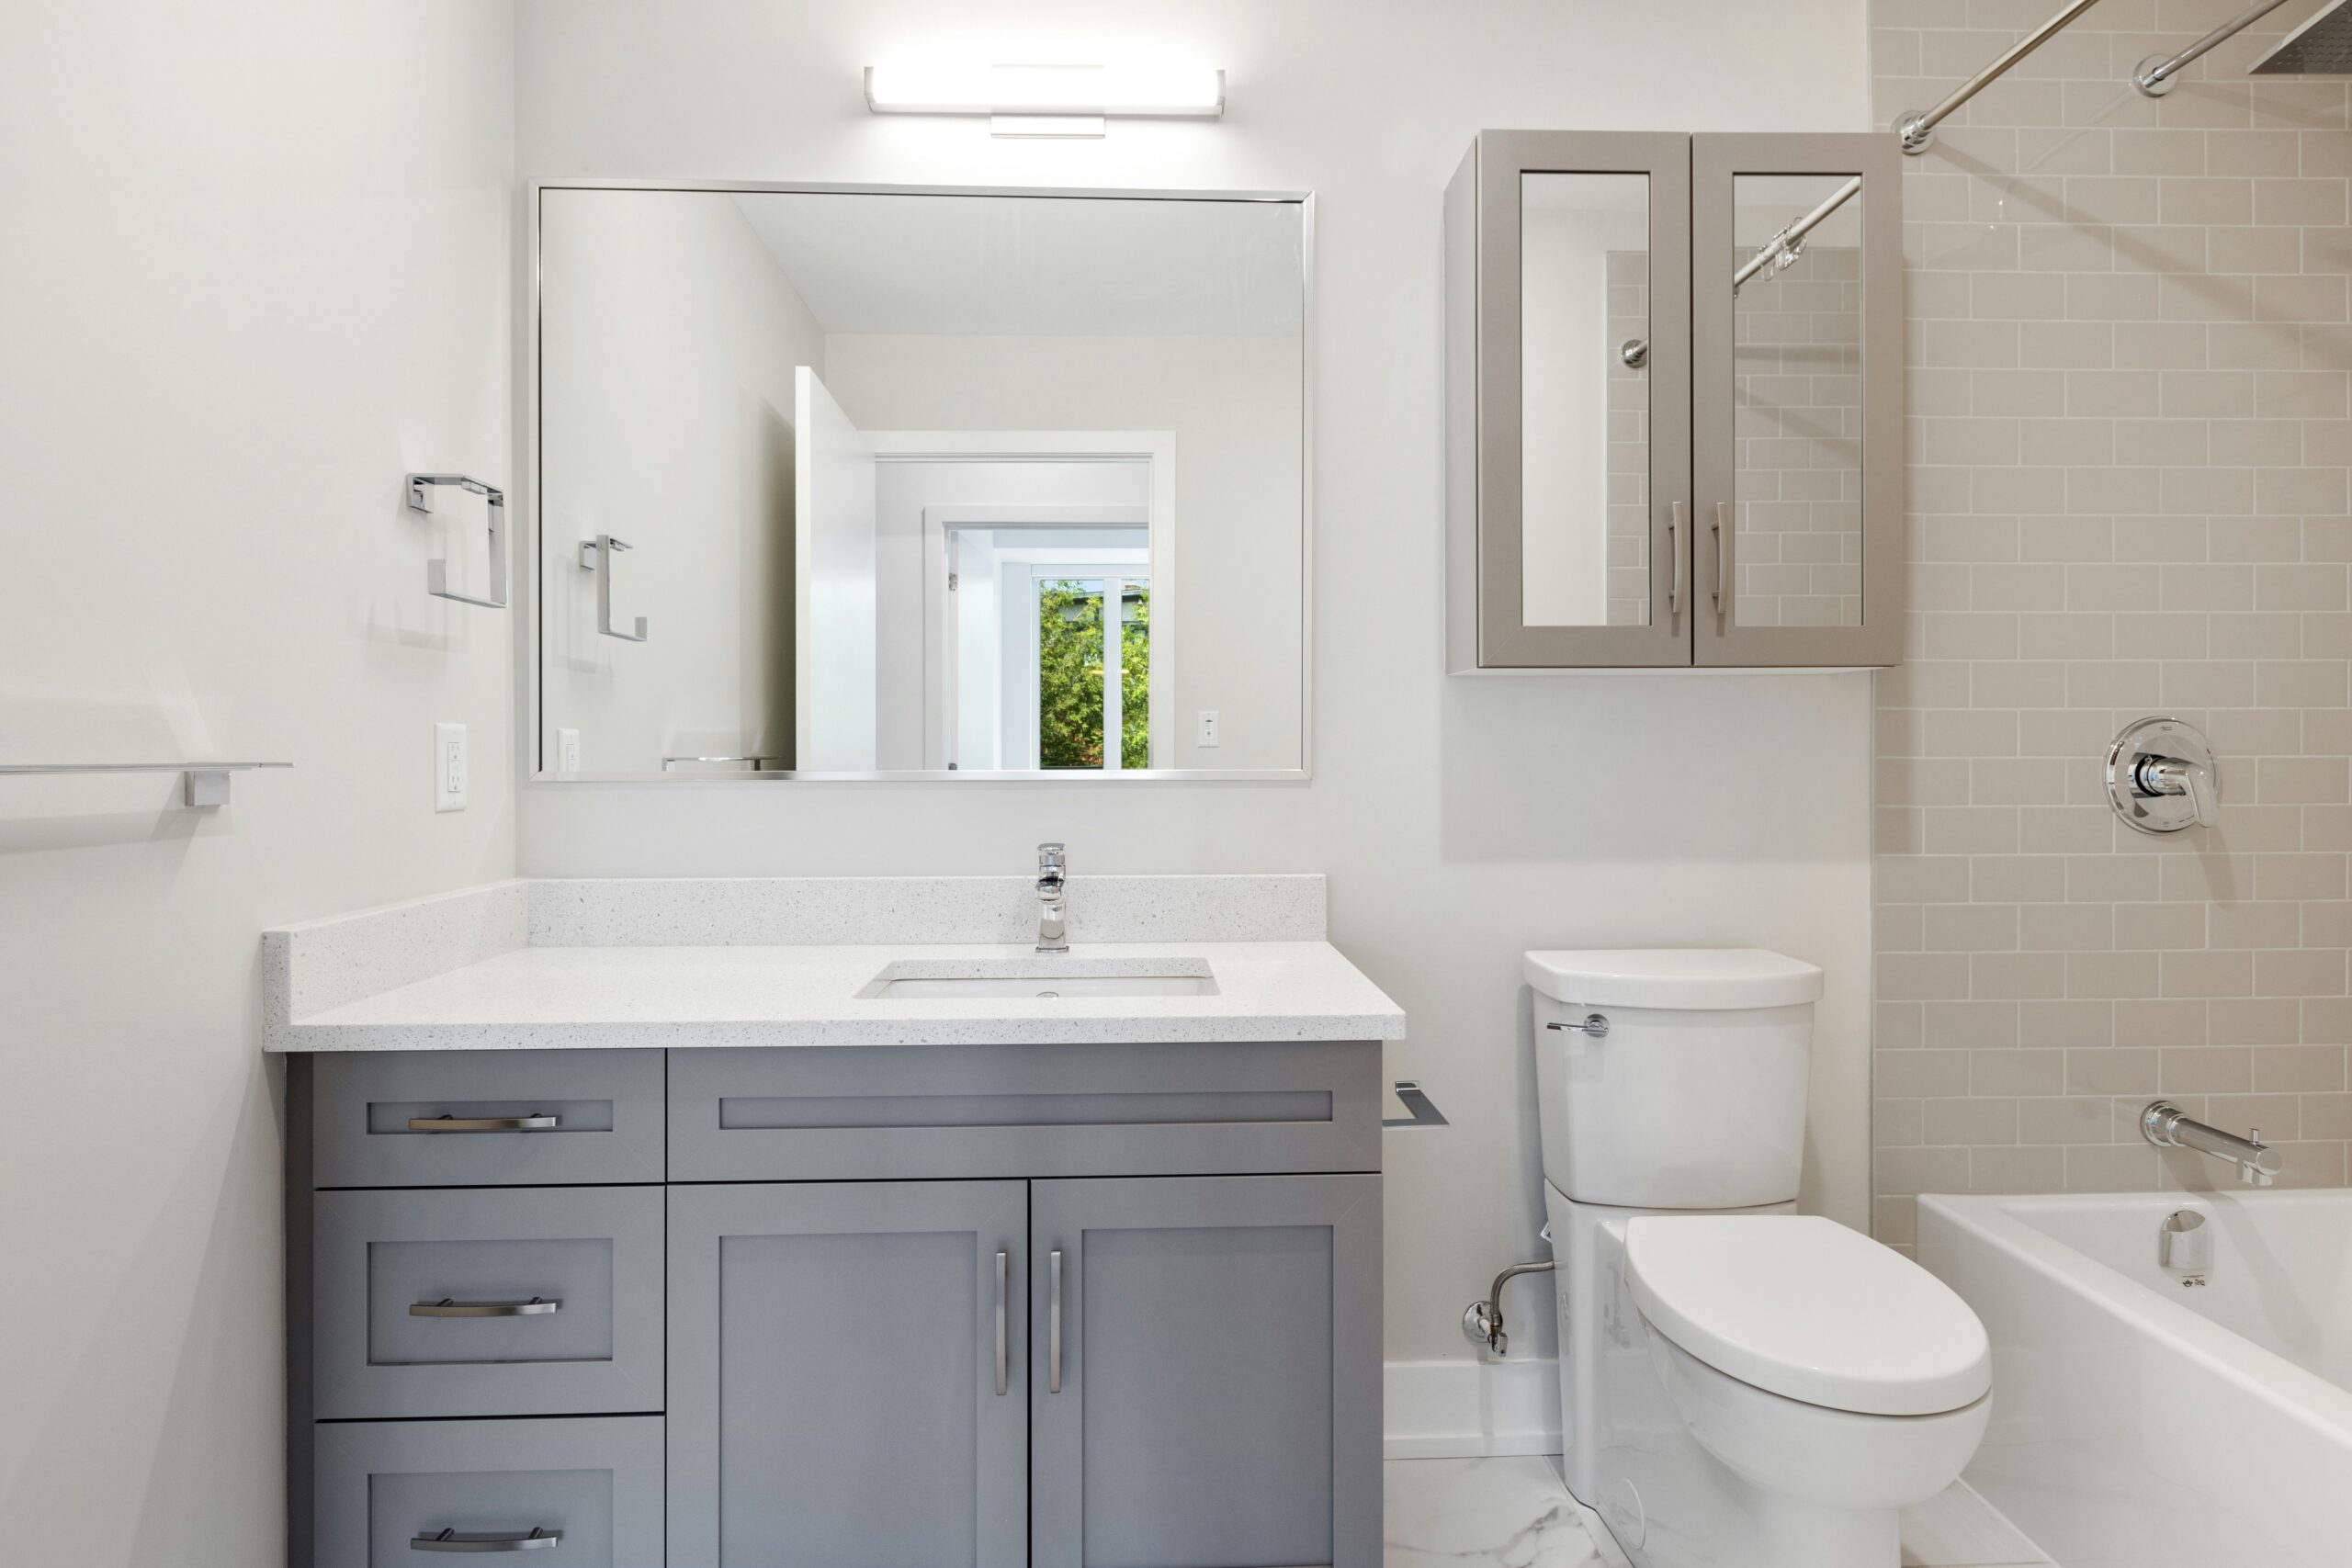 clean bathroom sanitized surfaces maid impressions